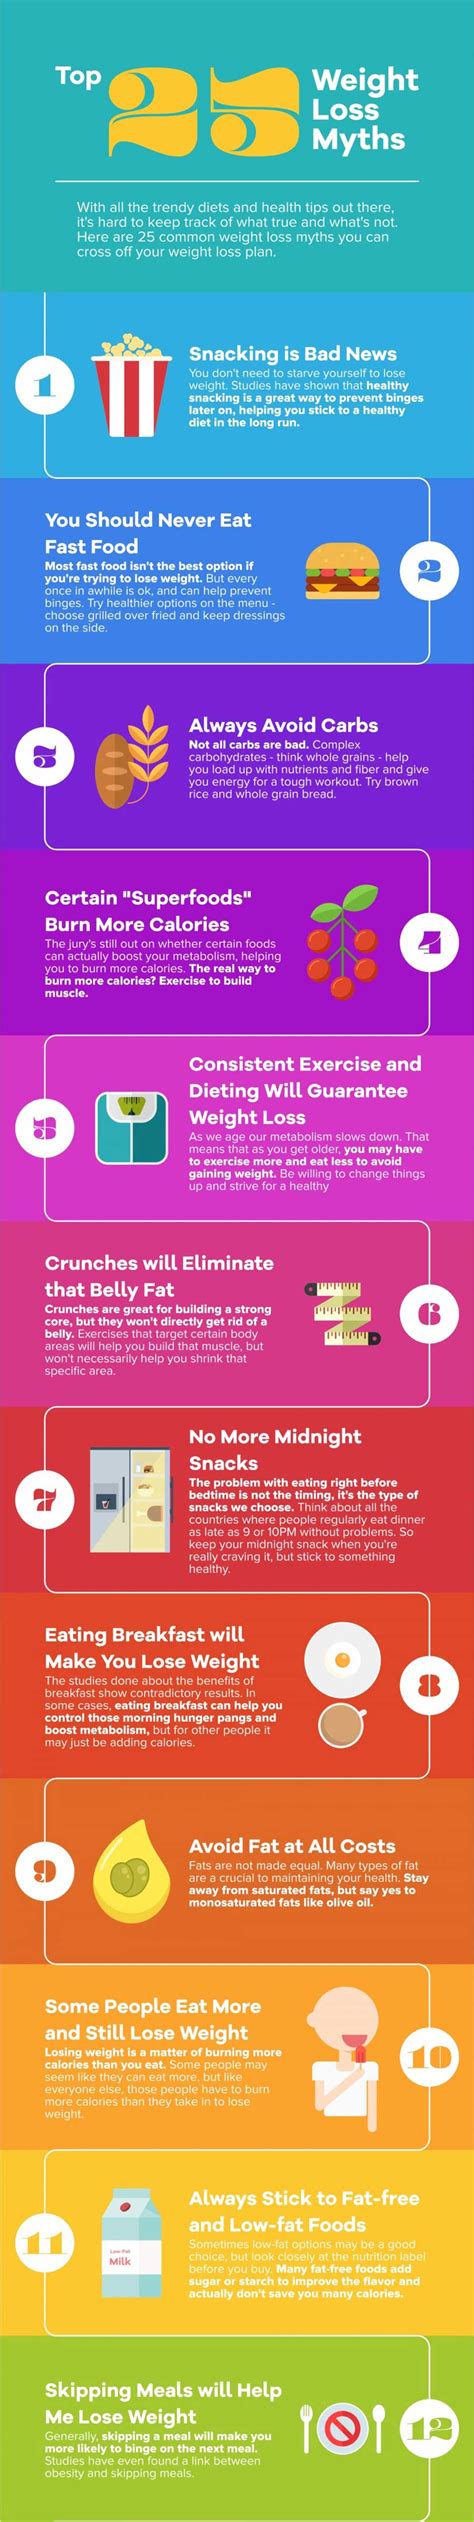 Every Weight Loss Myth Debunked